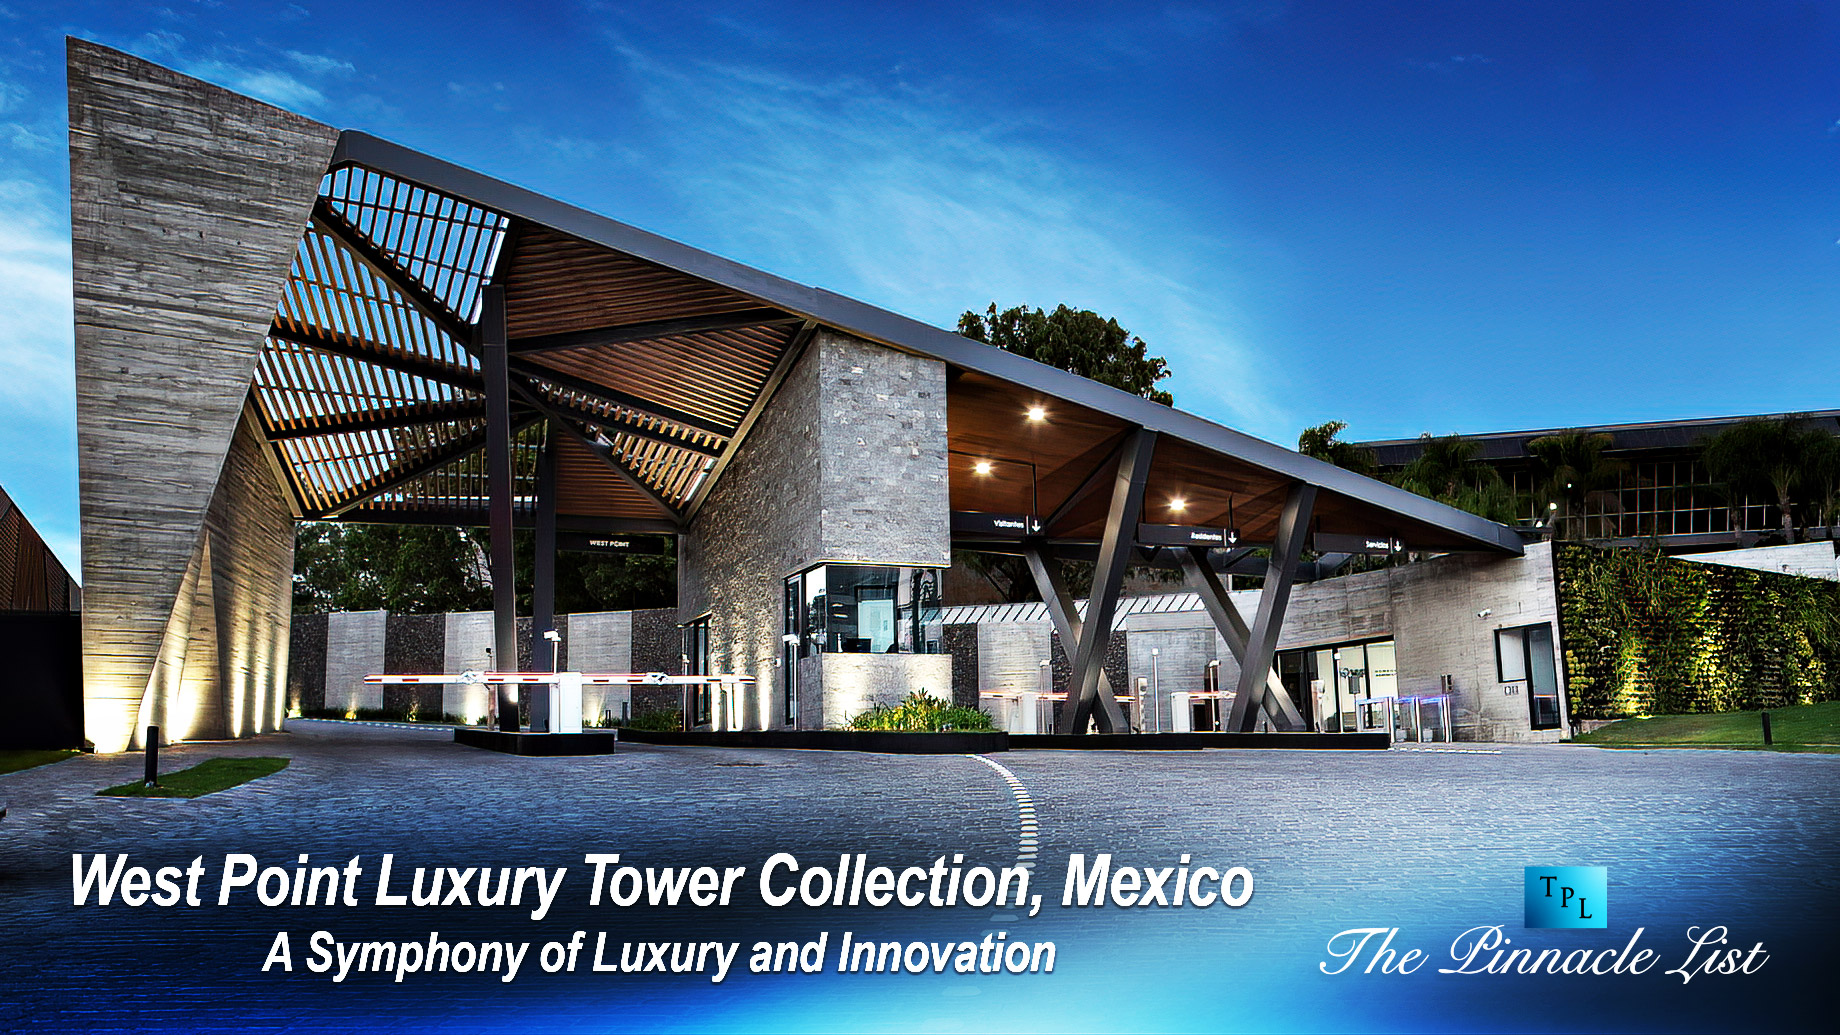 West Point Luxury Tower Collection, Mexico: A Symphony of Luxury and Innovation